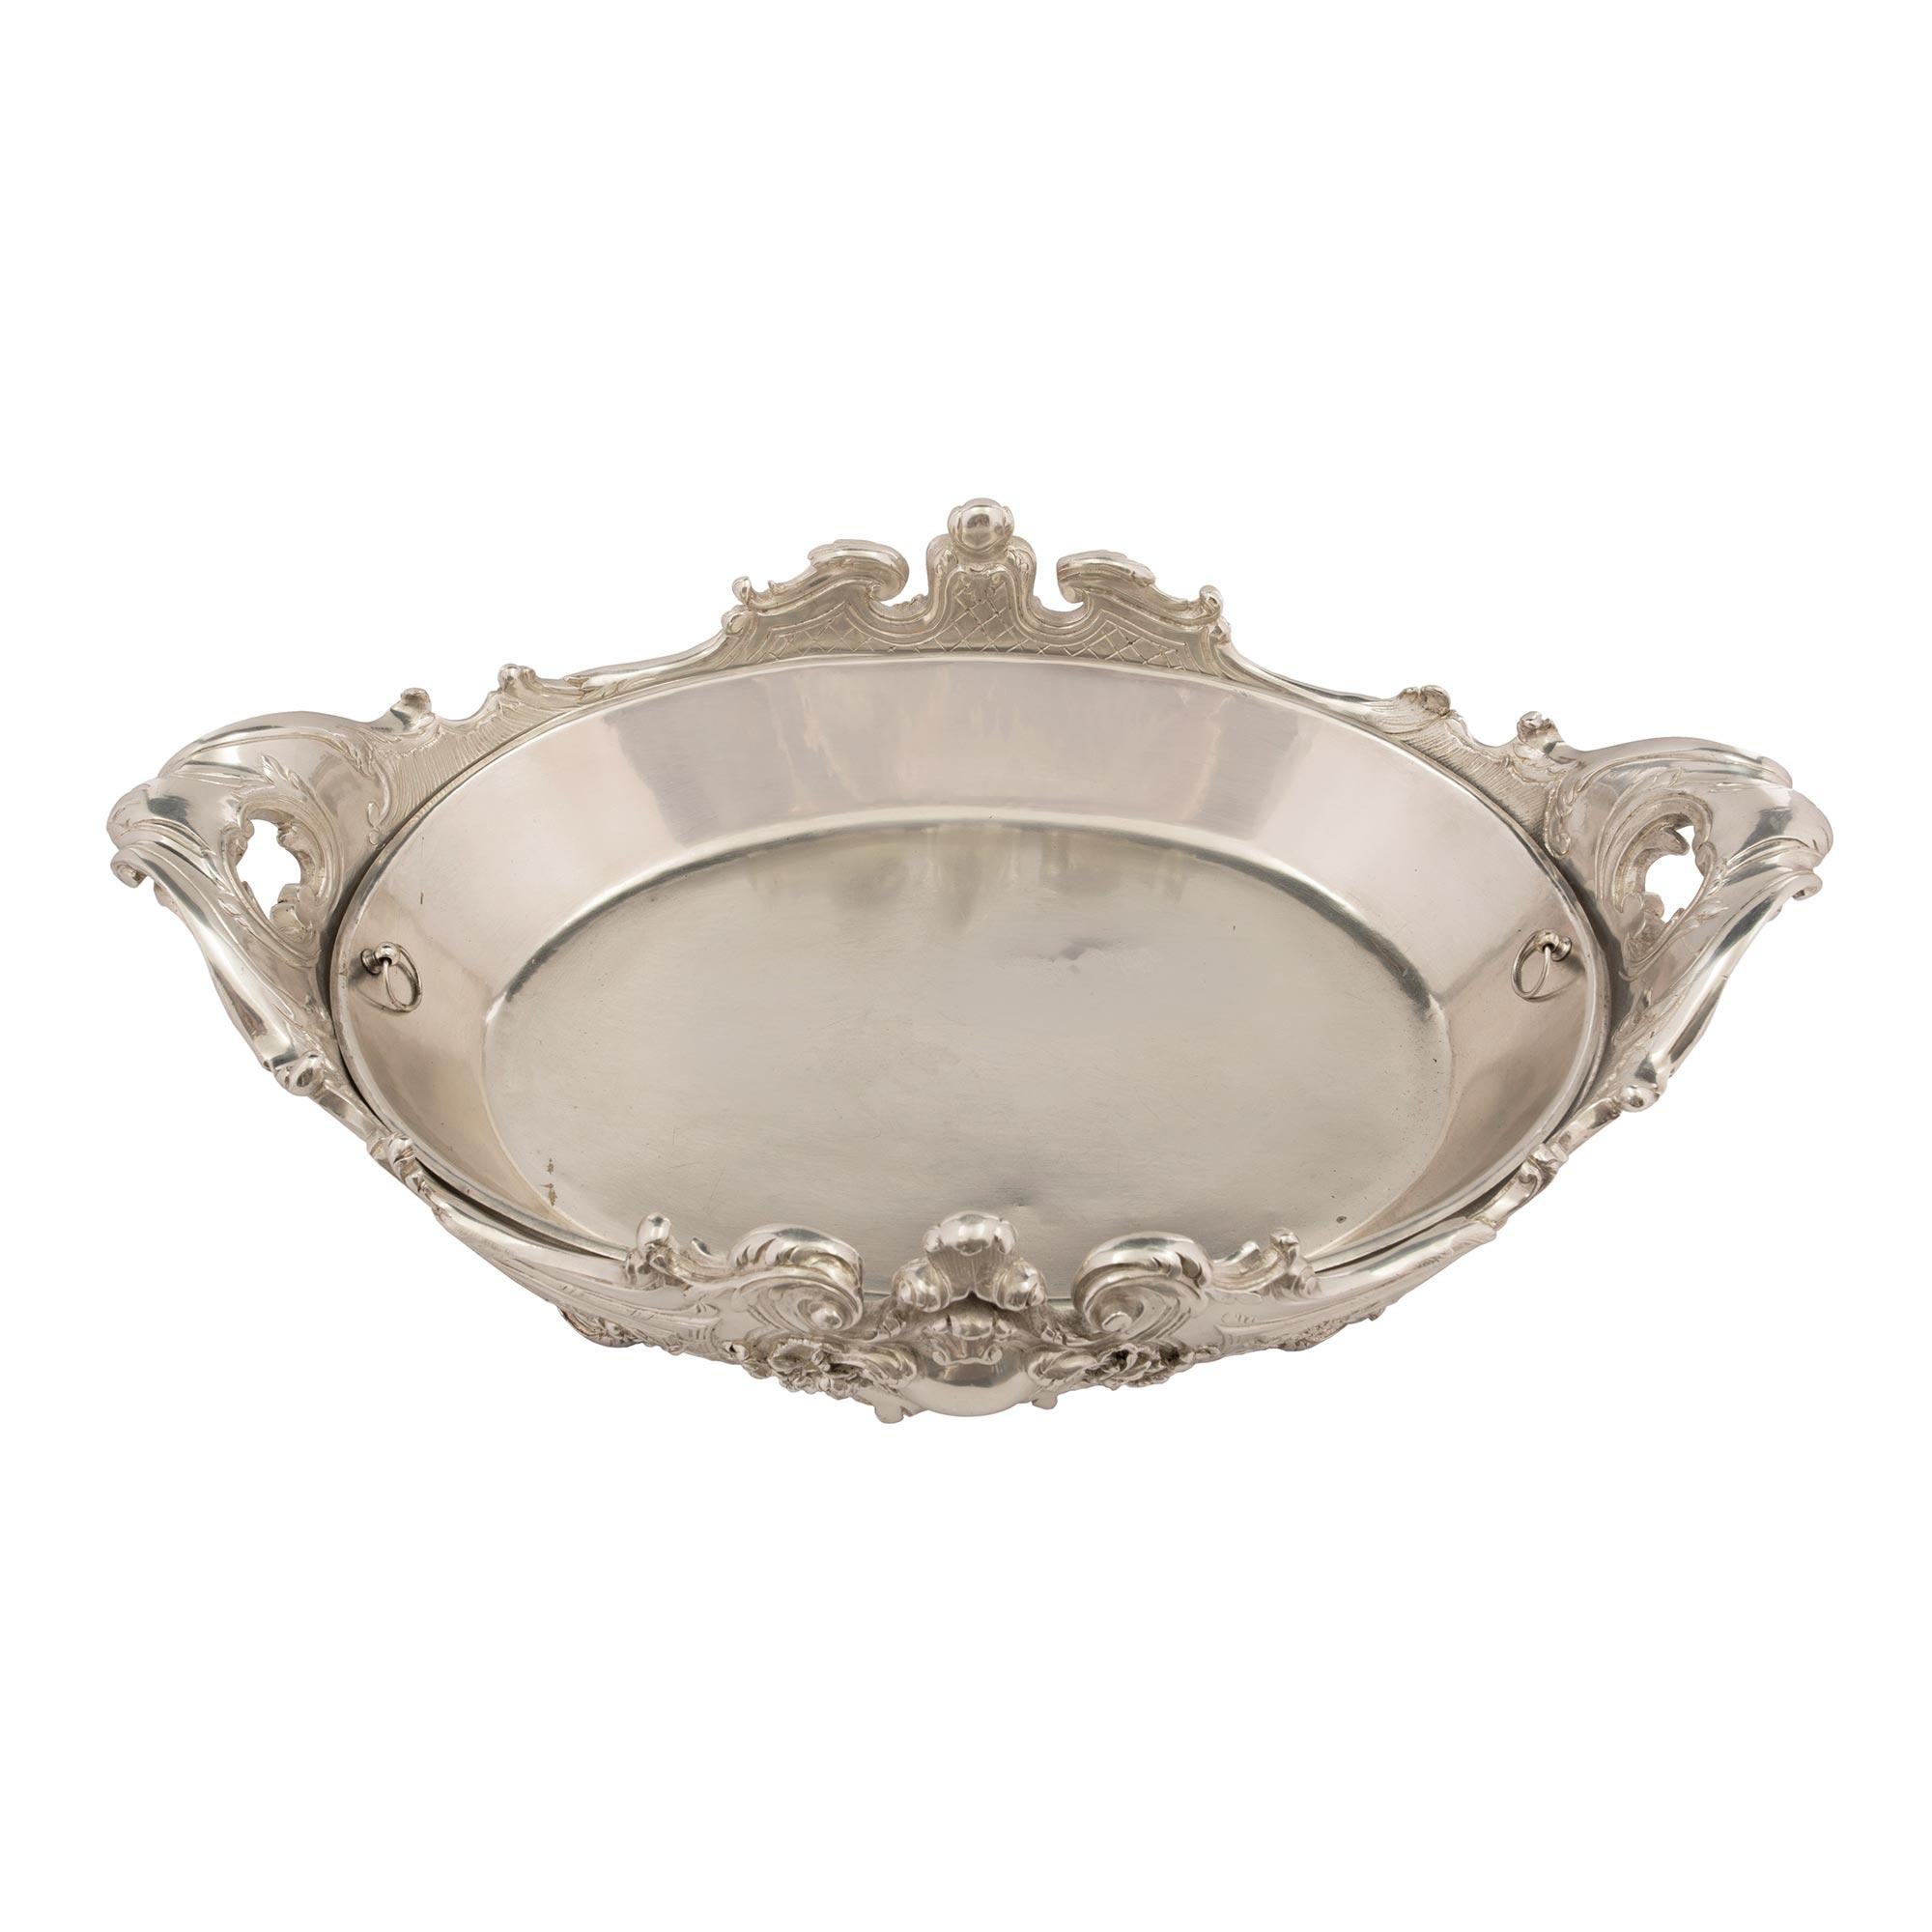 A superb French 19th century Louis XV st. silvered bronze centerpiece with its original removable interior. The centerpiece is raised by elegant scrolled foliate feet. The body displays a beautiful and most decorative scalloped shape with fine